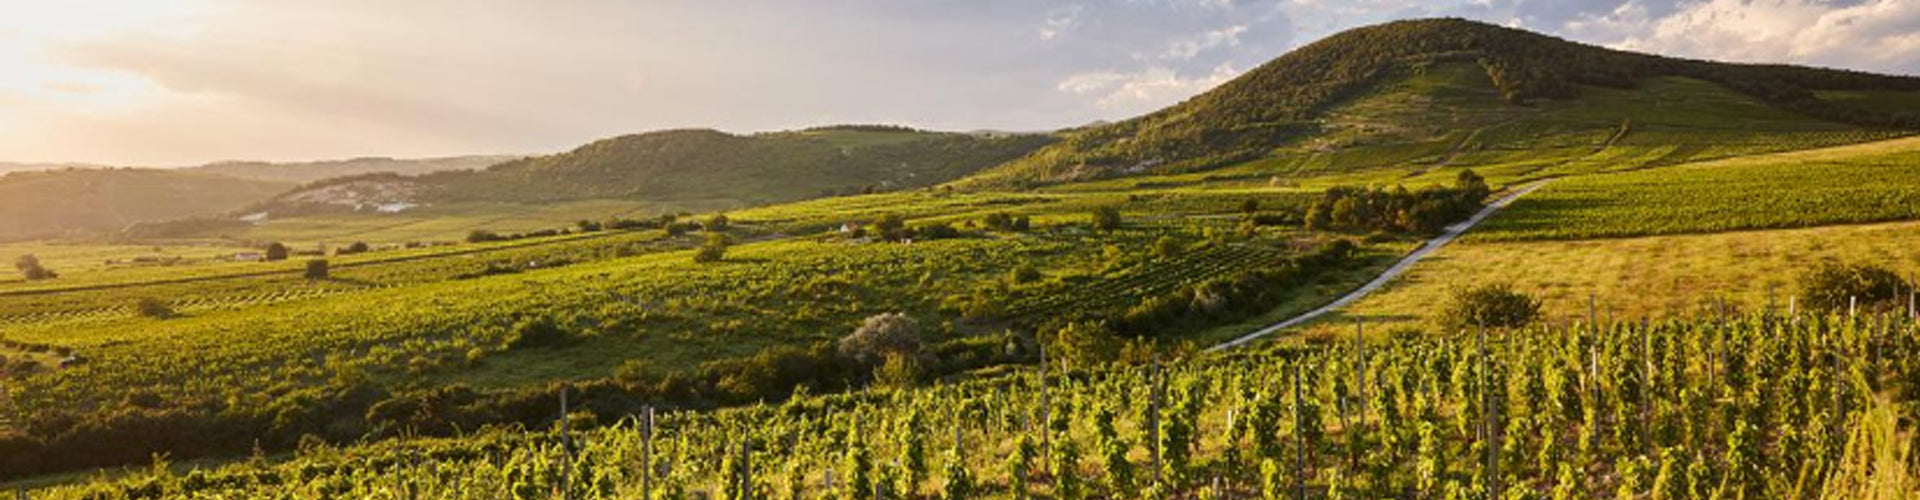 Barta Winery Vineyards in the village of Mád at the heart of Tokaj in Hungary